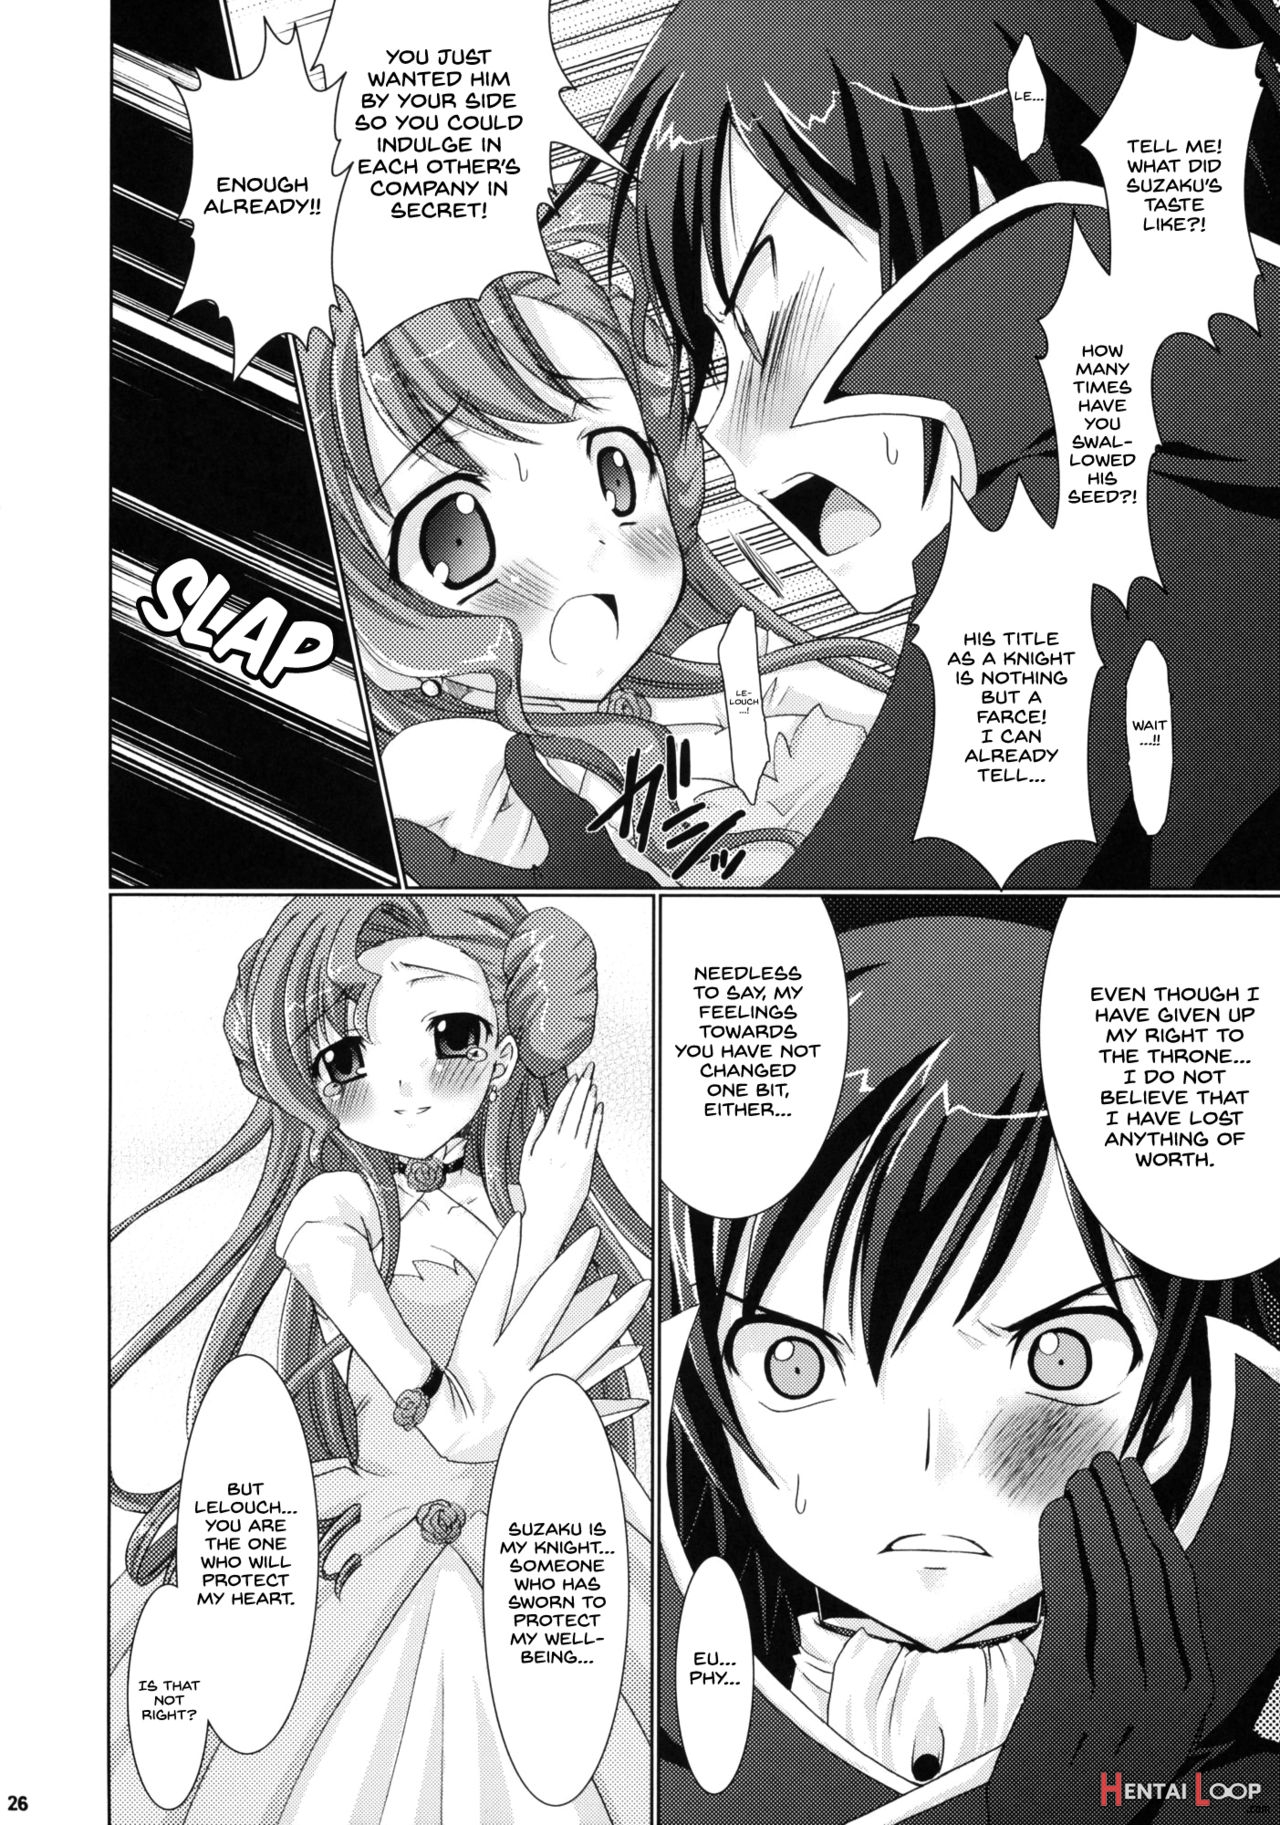 Kouhime Kyouhime page 26